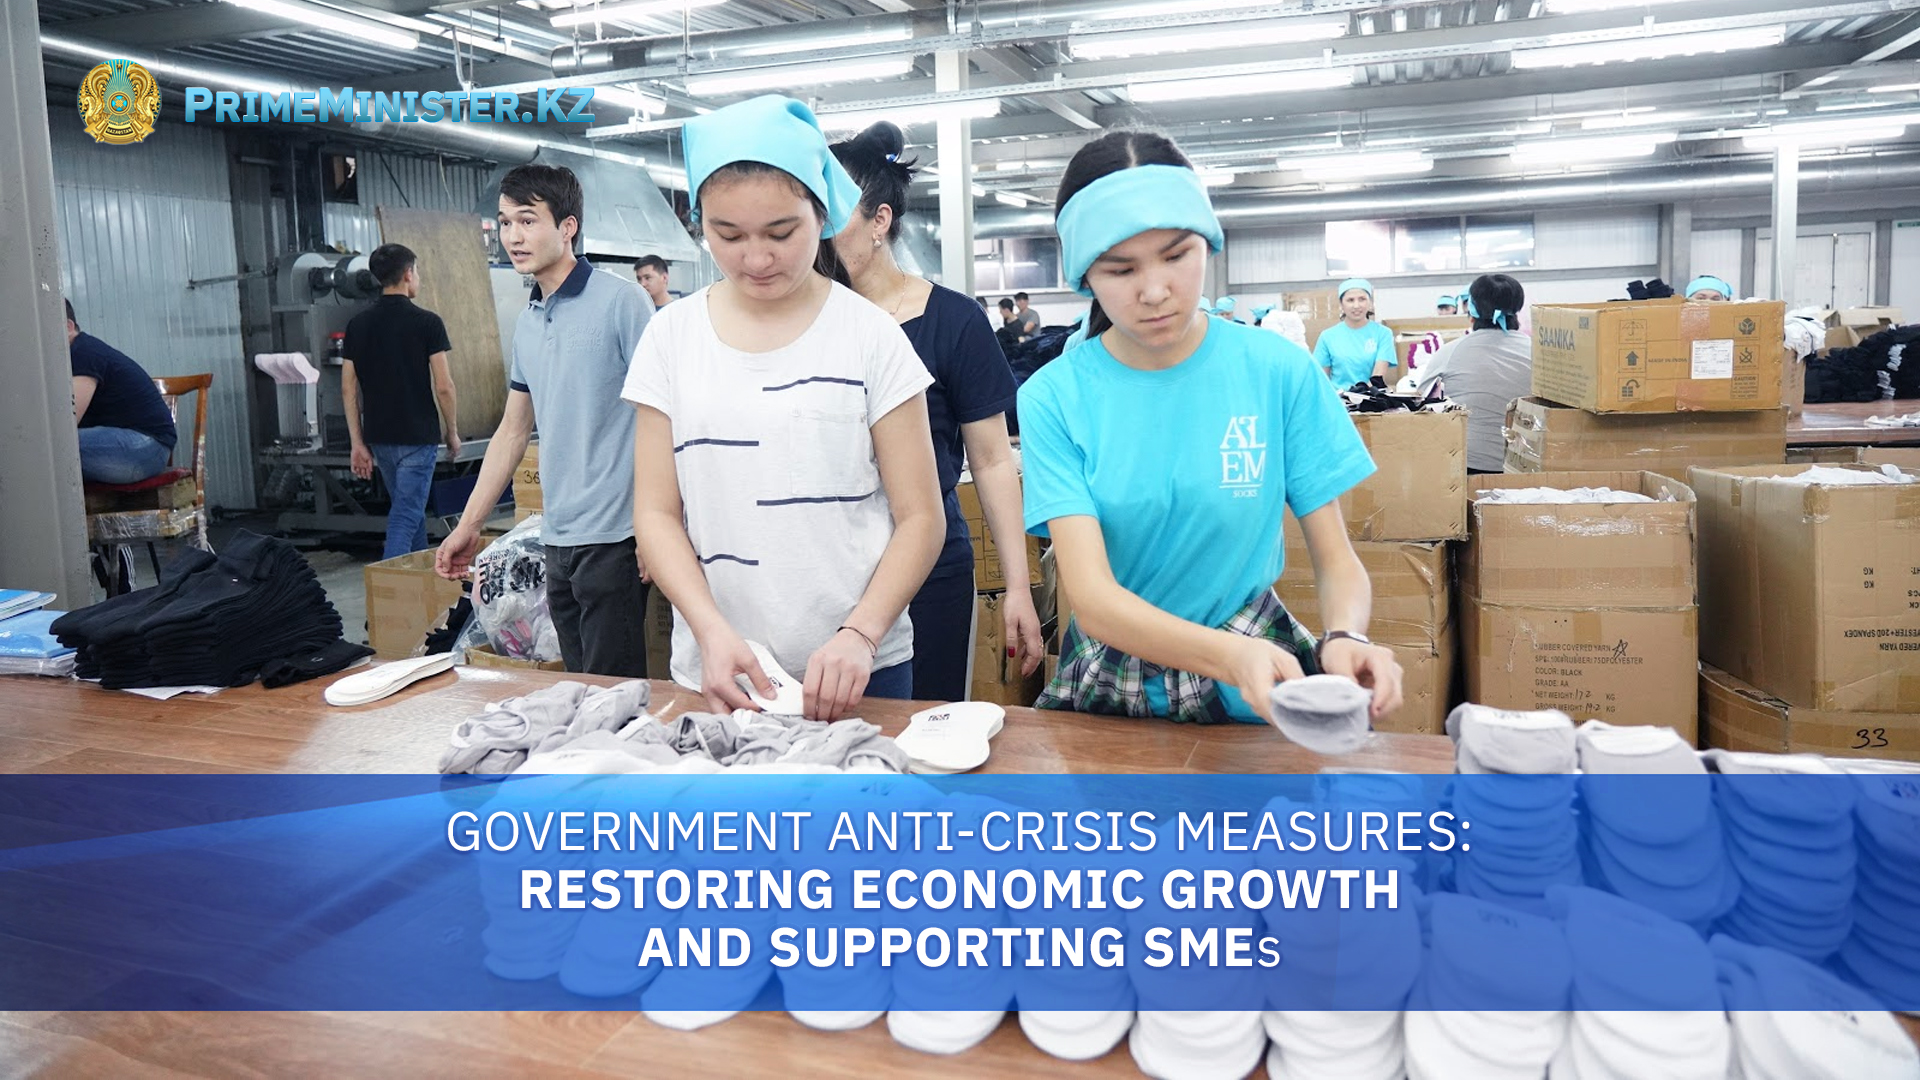 Government's anti-crisis measures: Restoring economic growth and supporting SMEs